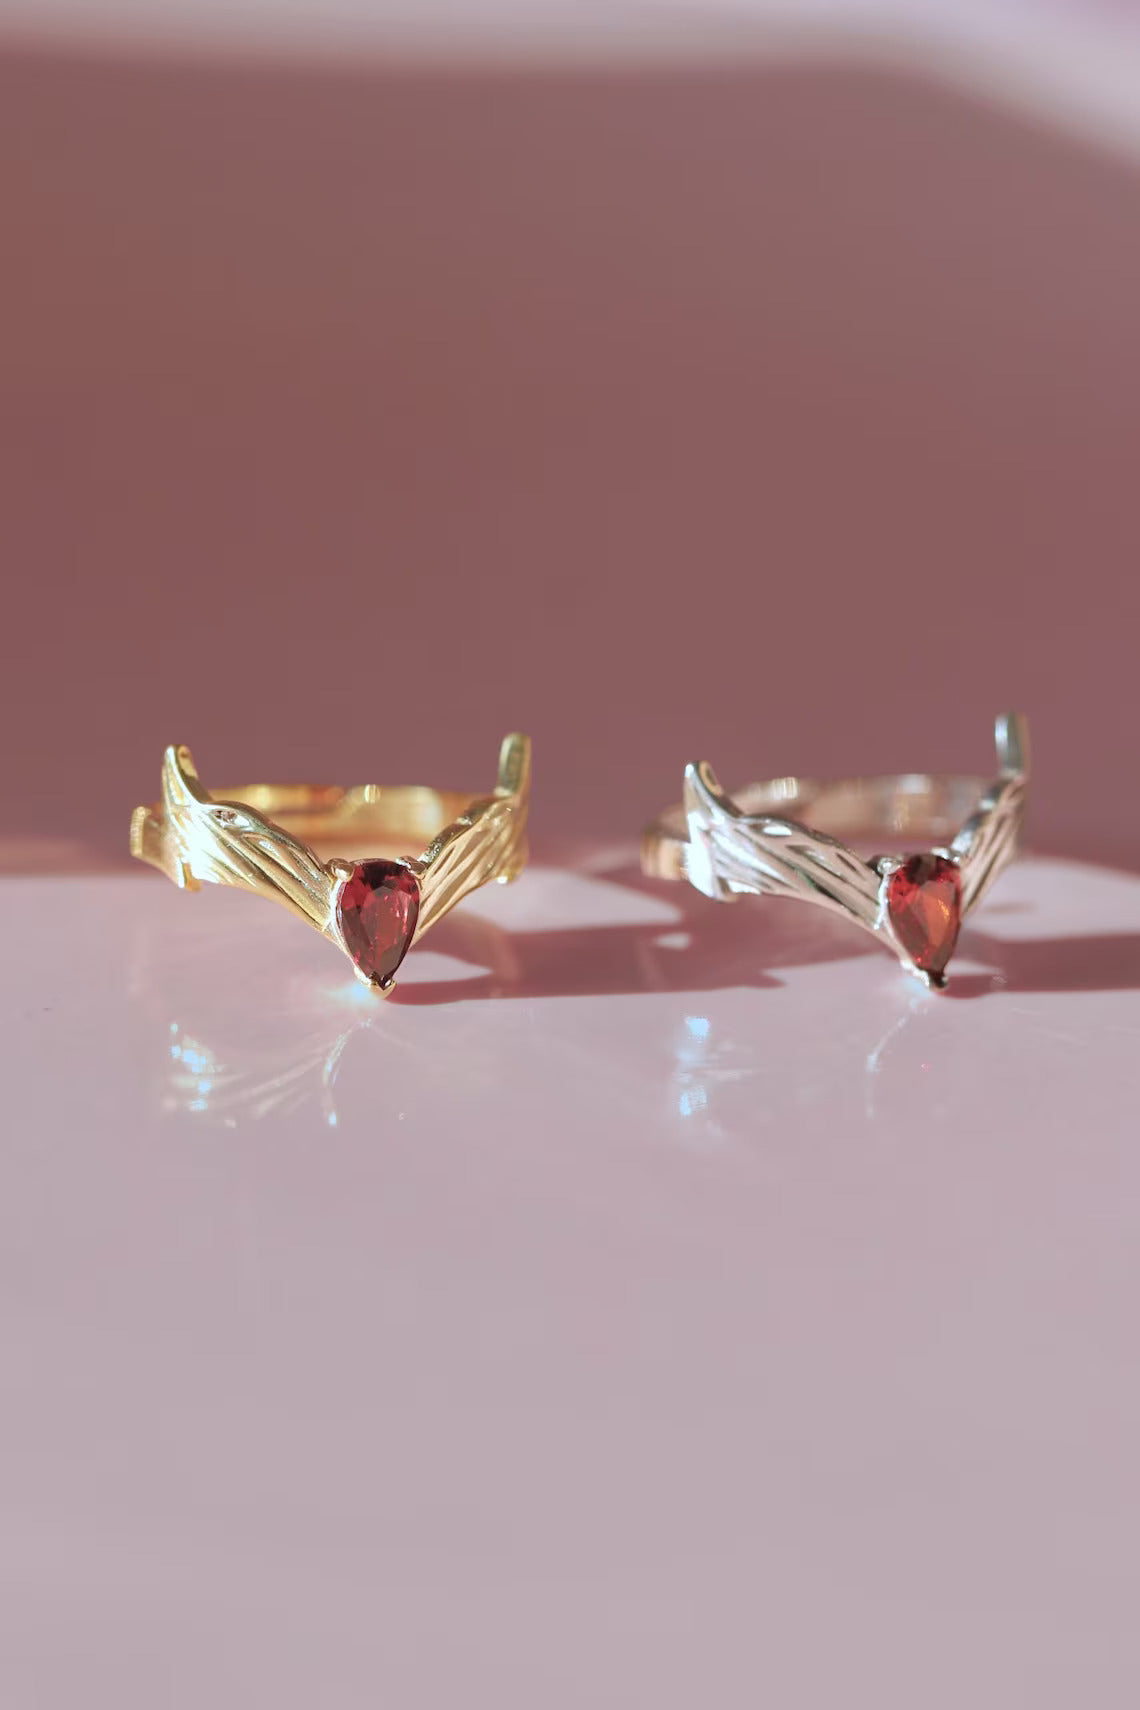 Scarlet Witch Crown Inspired Ring, Superhero Scarlet Witch Ring